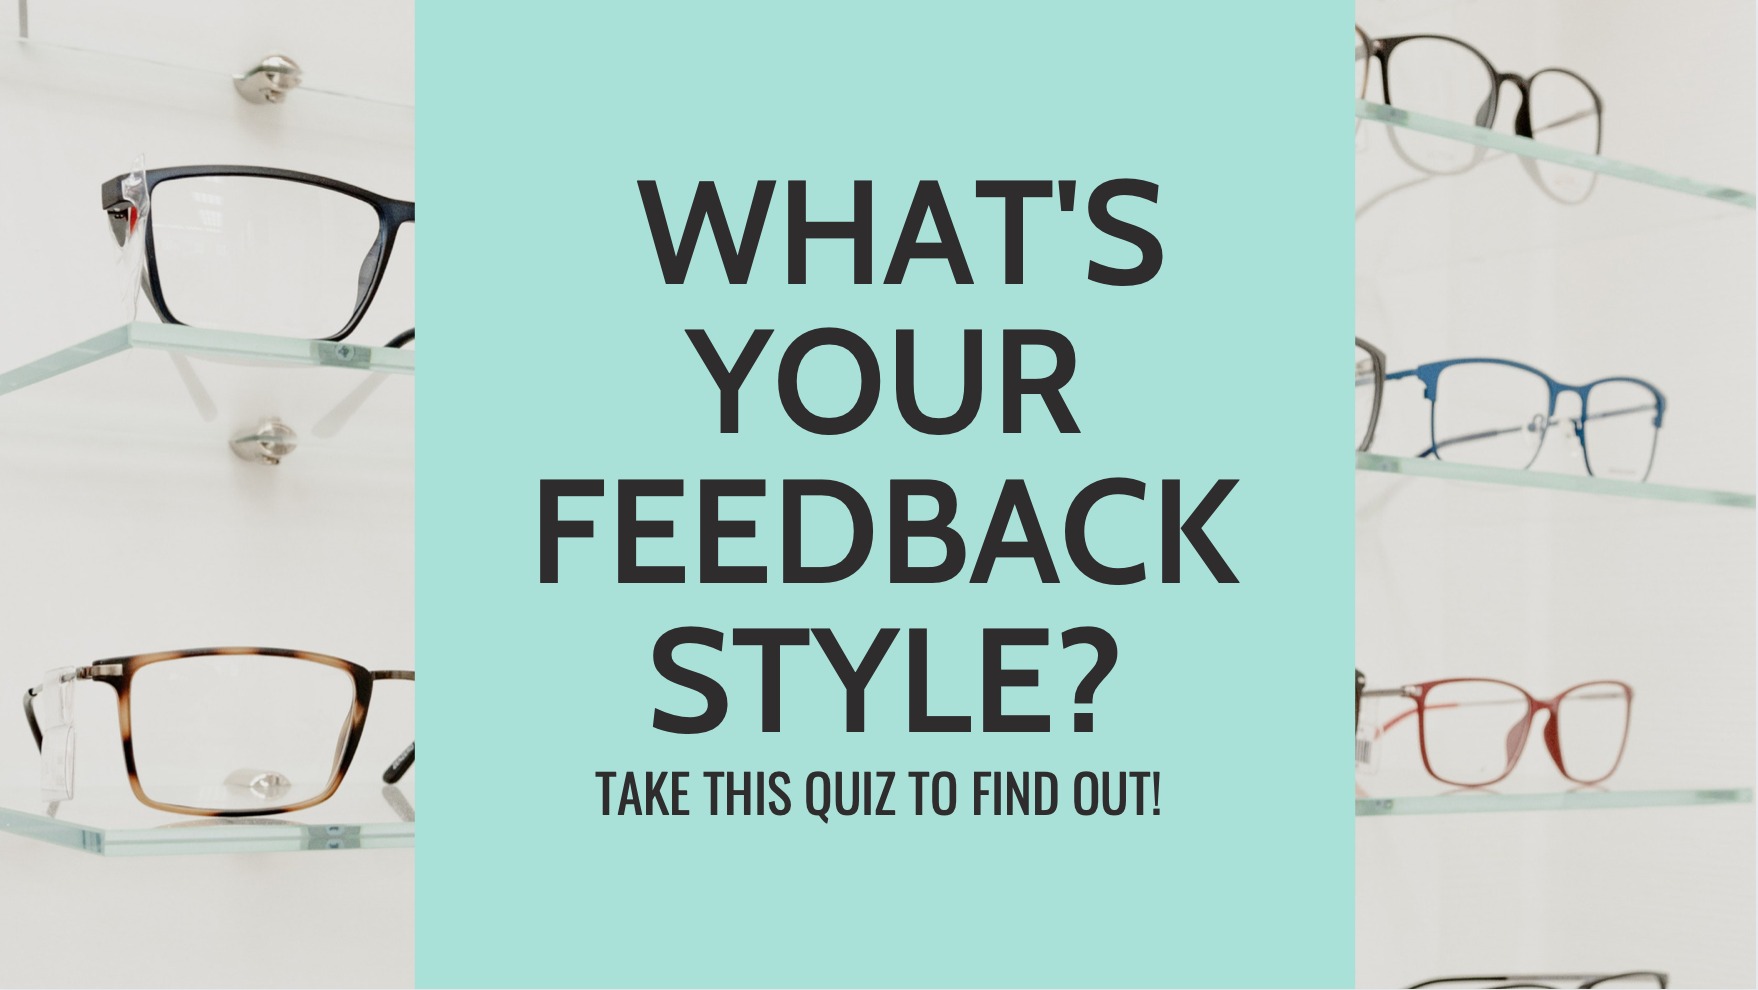 What's your feedback style?